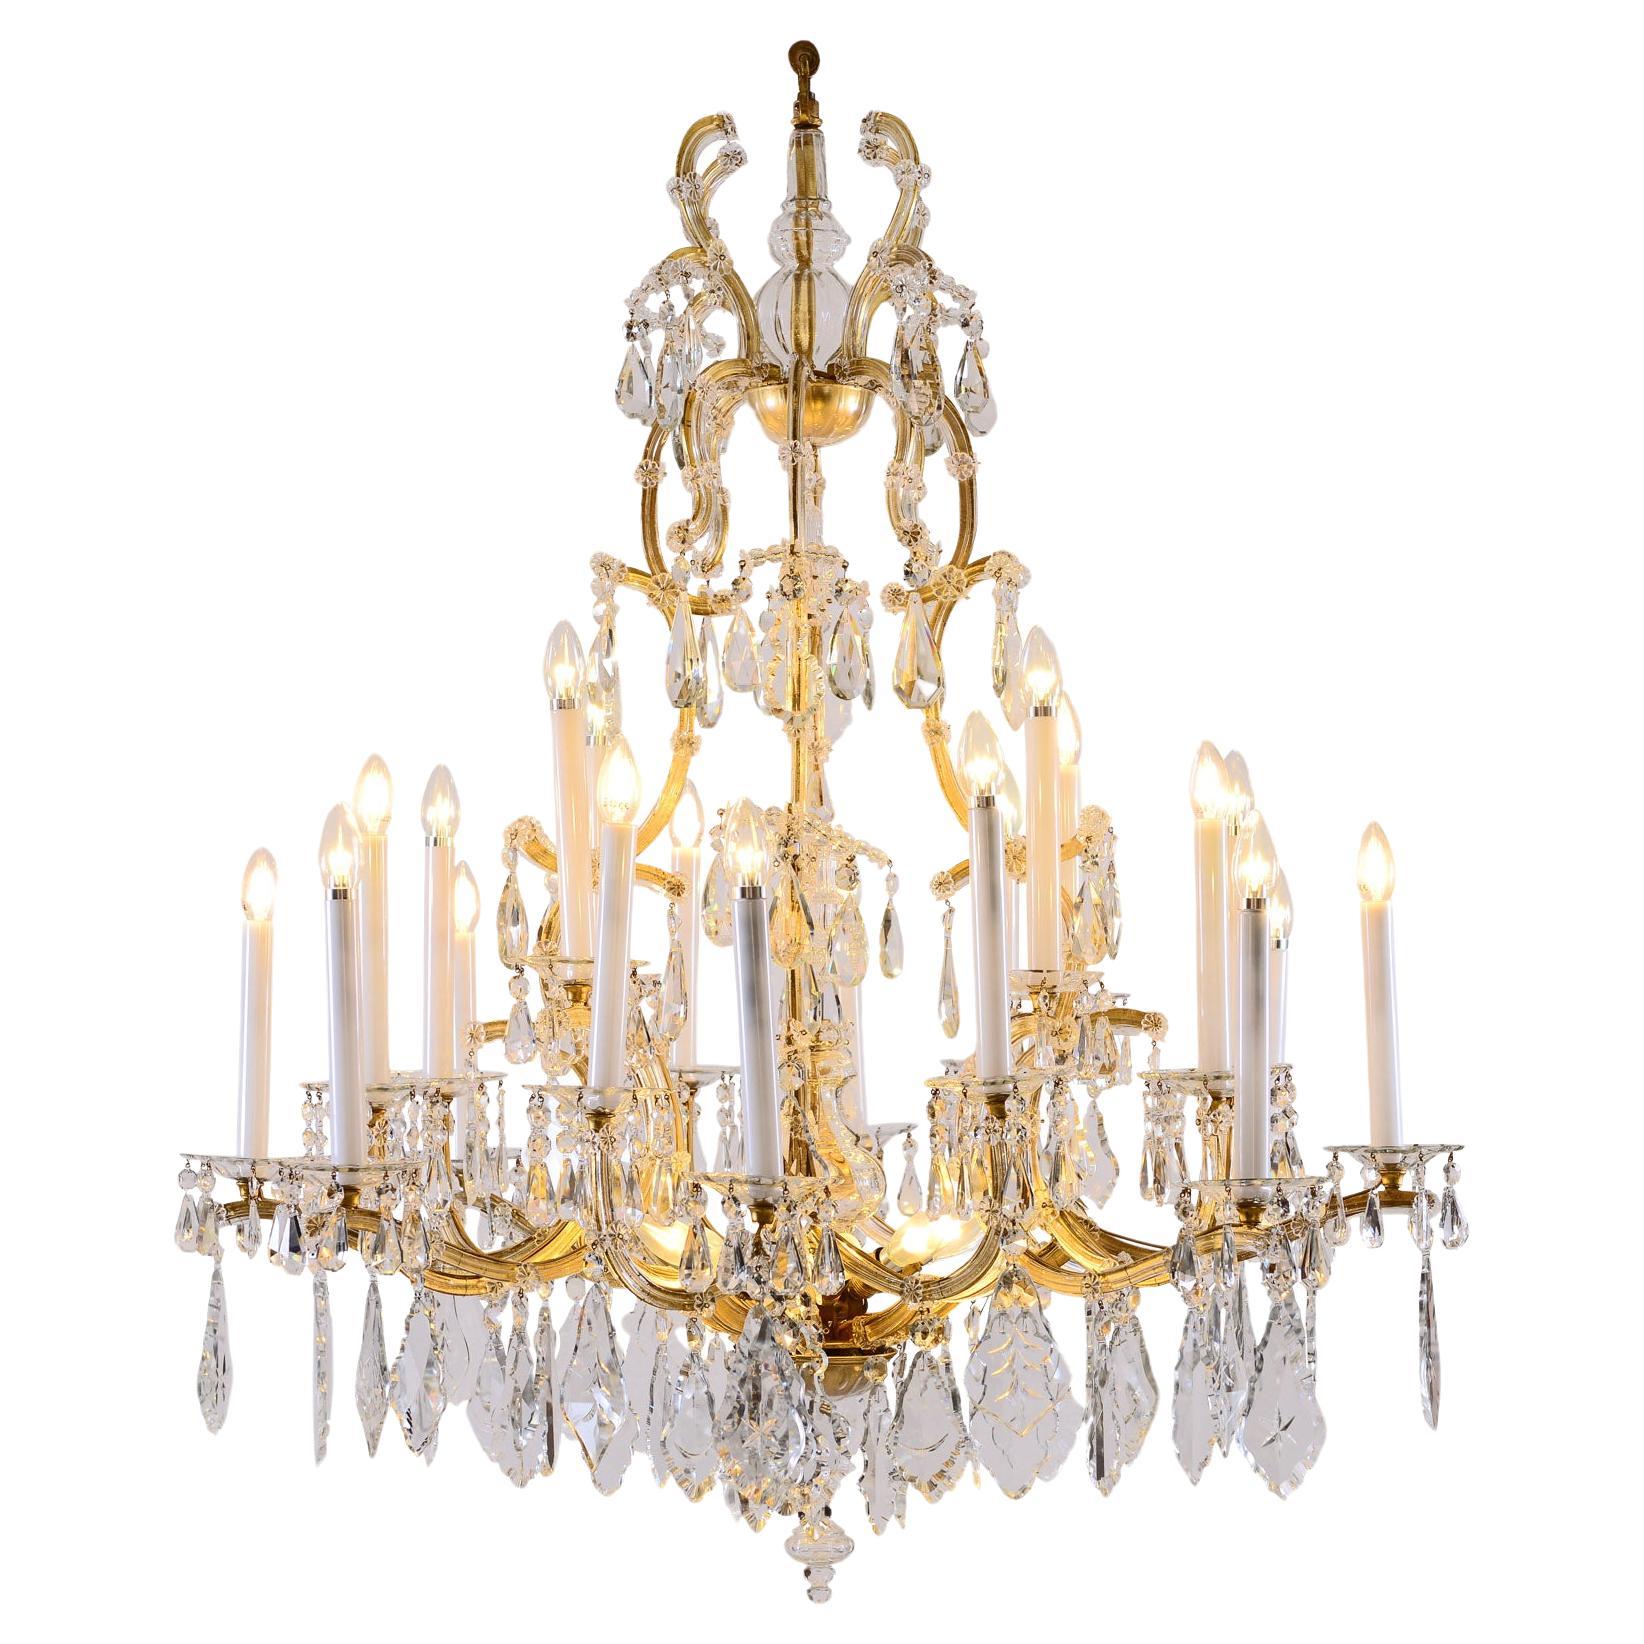 Original Lobmeyr Maria Theresien Crystal Chandelier, Richly Decorated 28 Lights For Sale